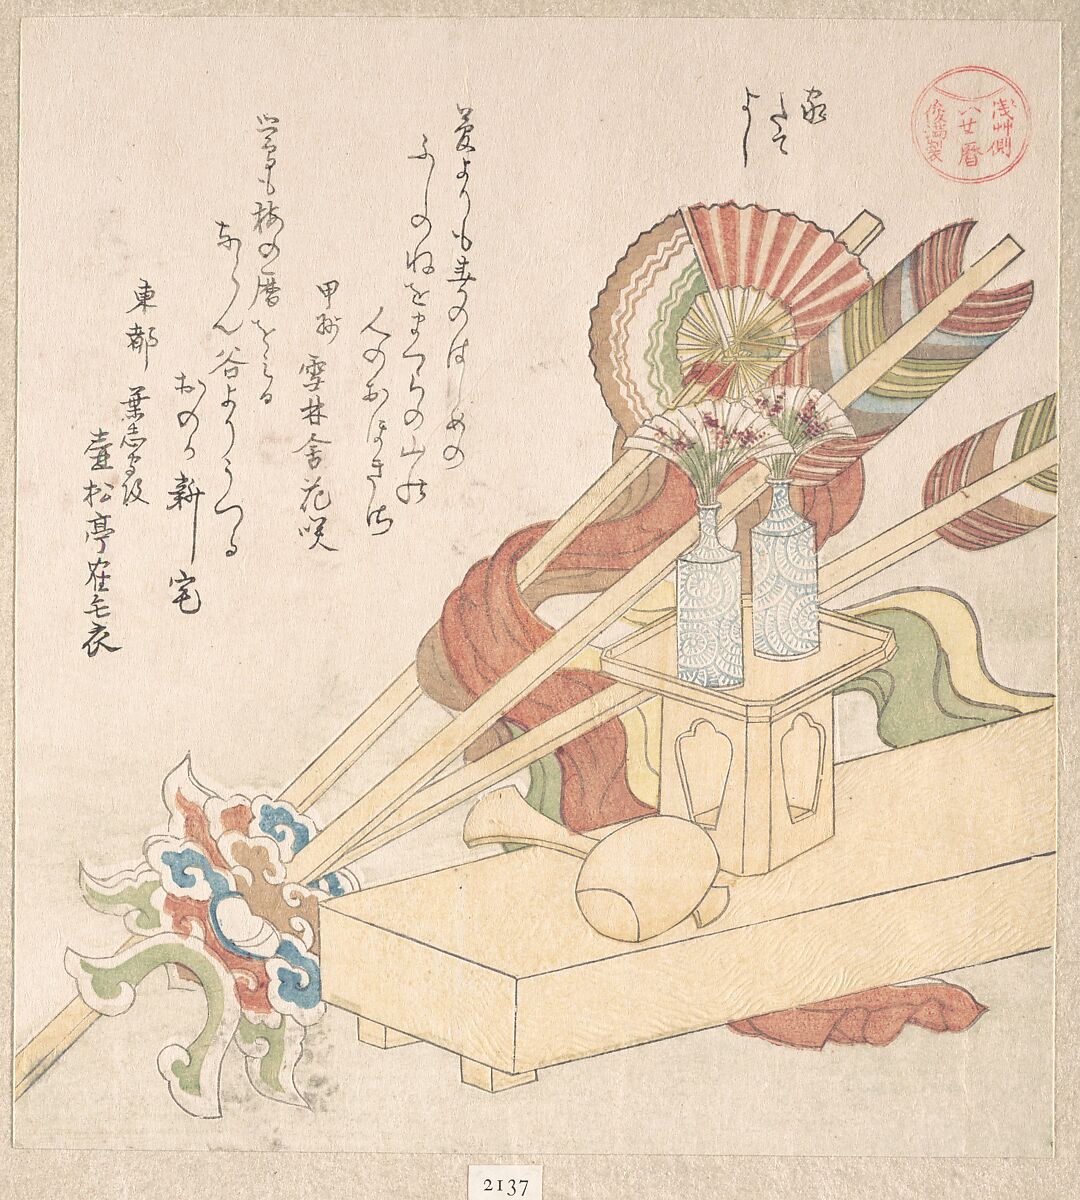 Ceremonial Things for the Celebration of Setting Up a New House, Kubo Shunman (Japanese, 1757–1820) (?), Woodblock print (surimono); ink and color on paper, Japan 